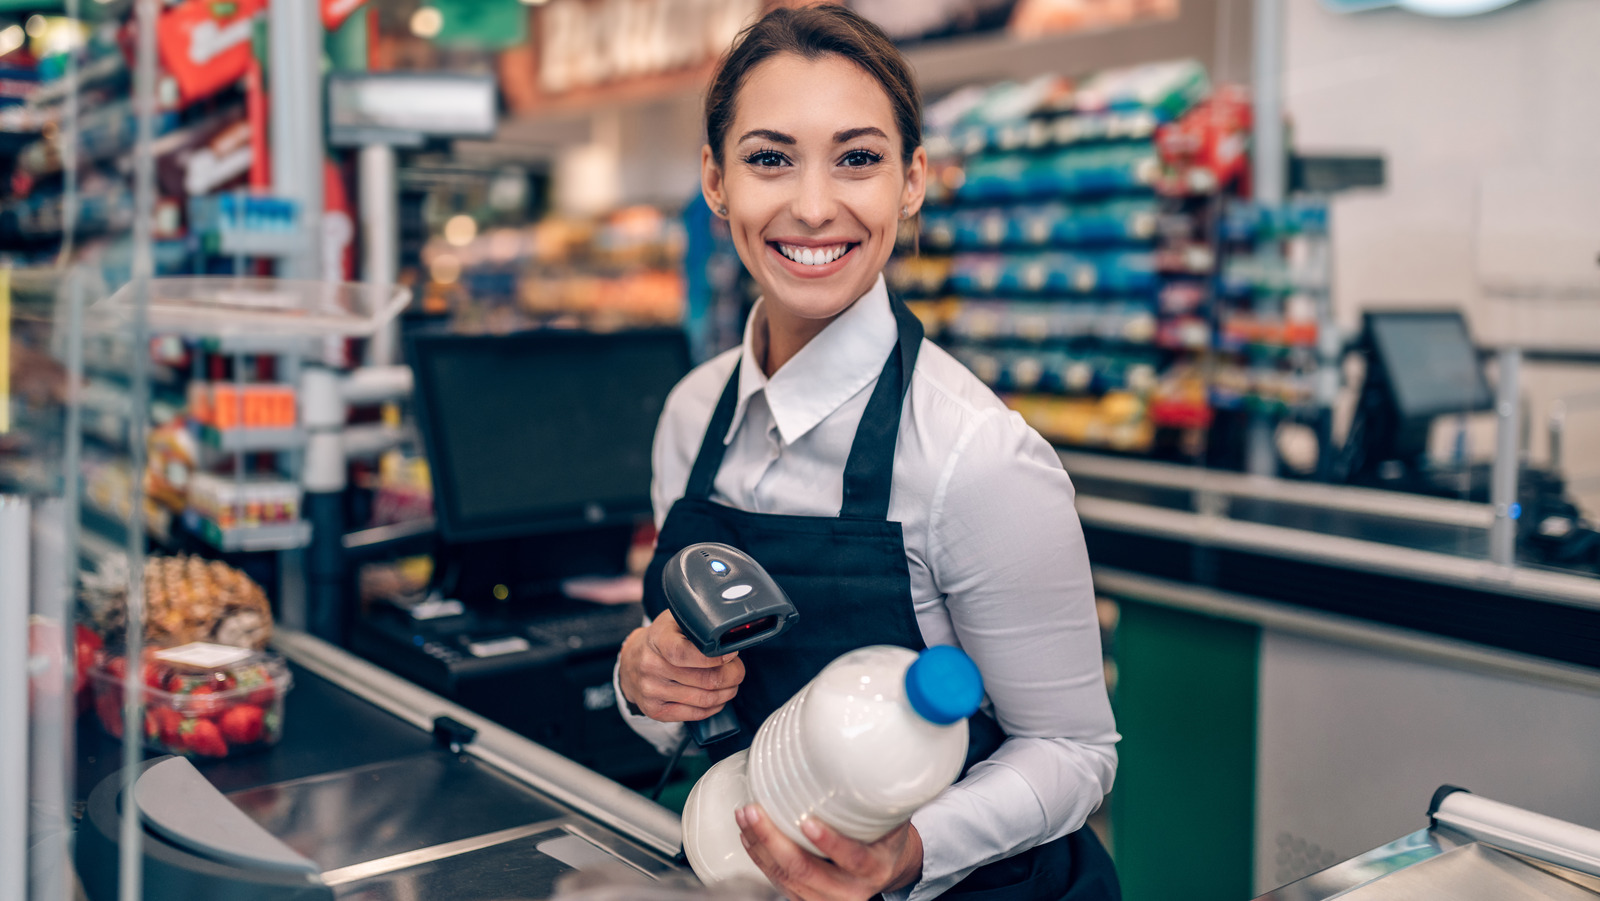 Can You Tip Grocery Store Workers?